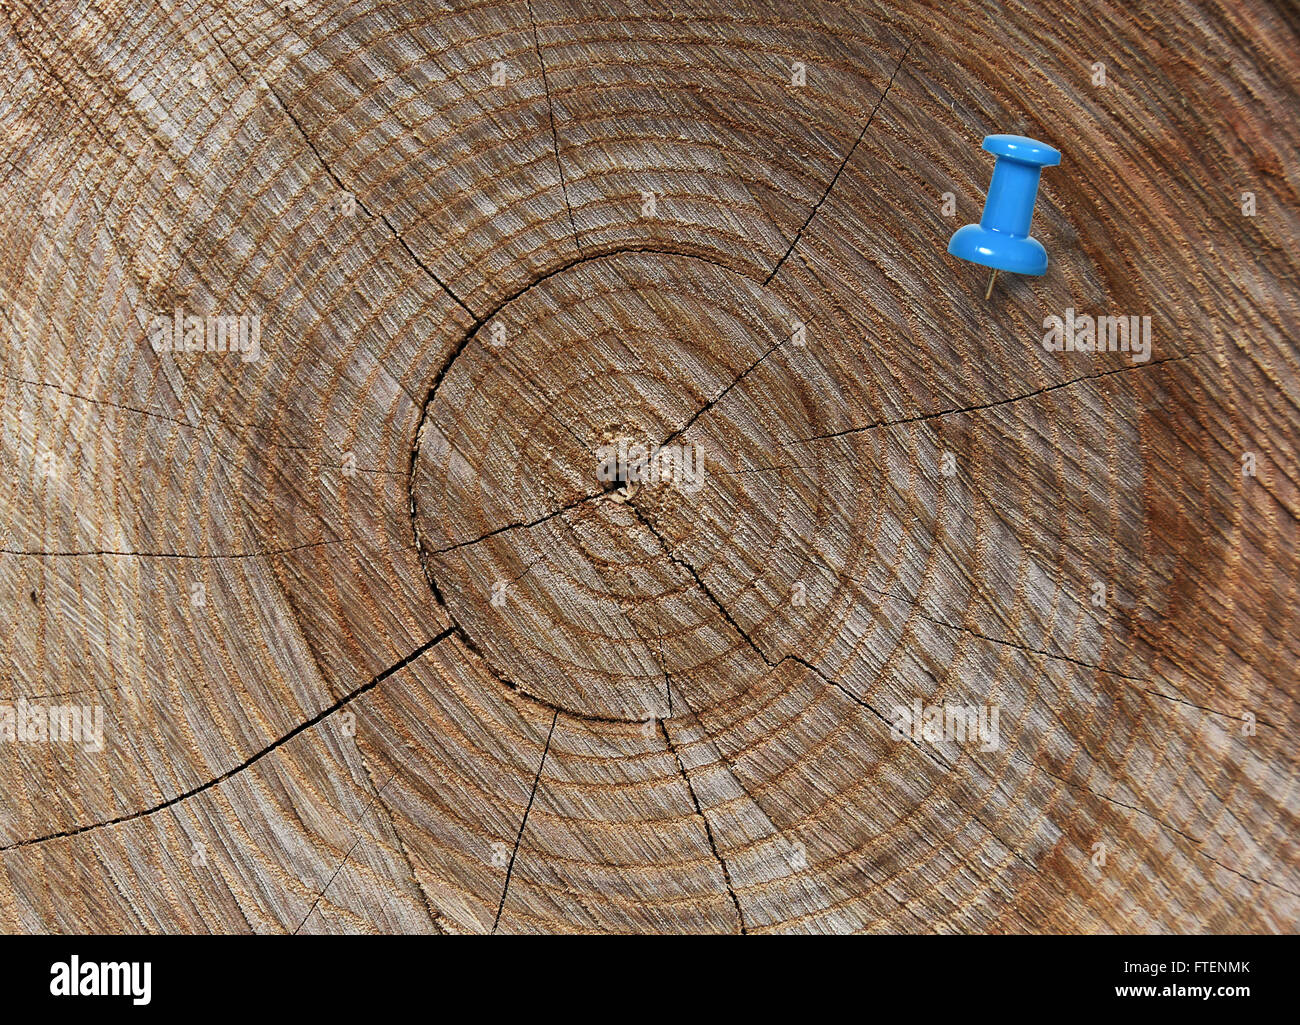 Blue thumbtack in crosscut tree with rings and cracks. Stock Photo